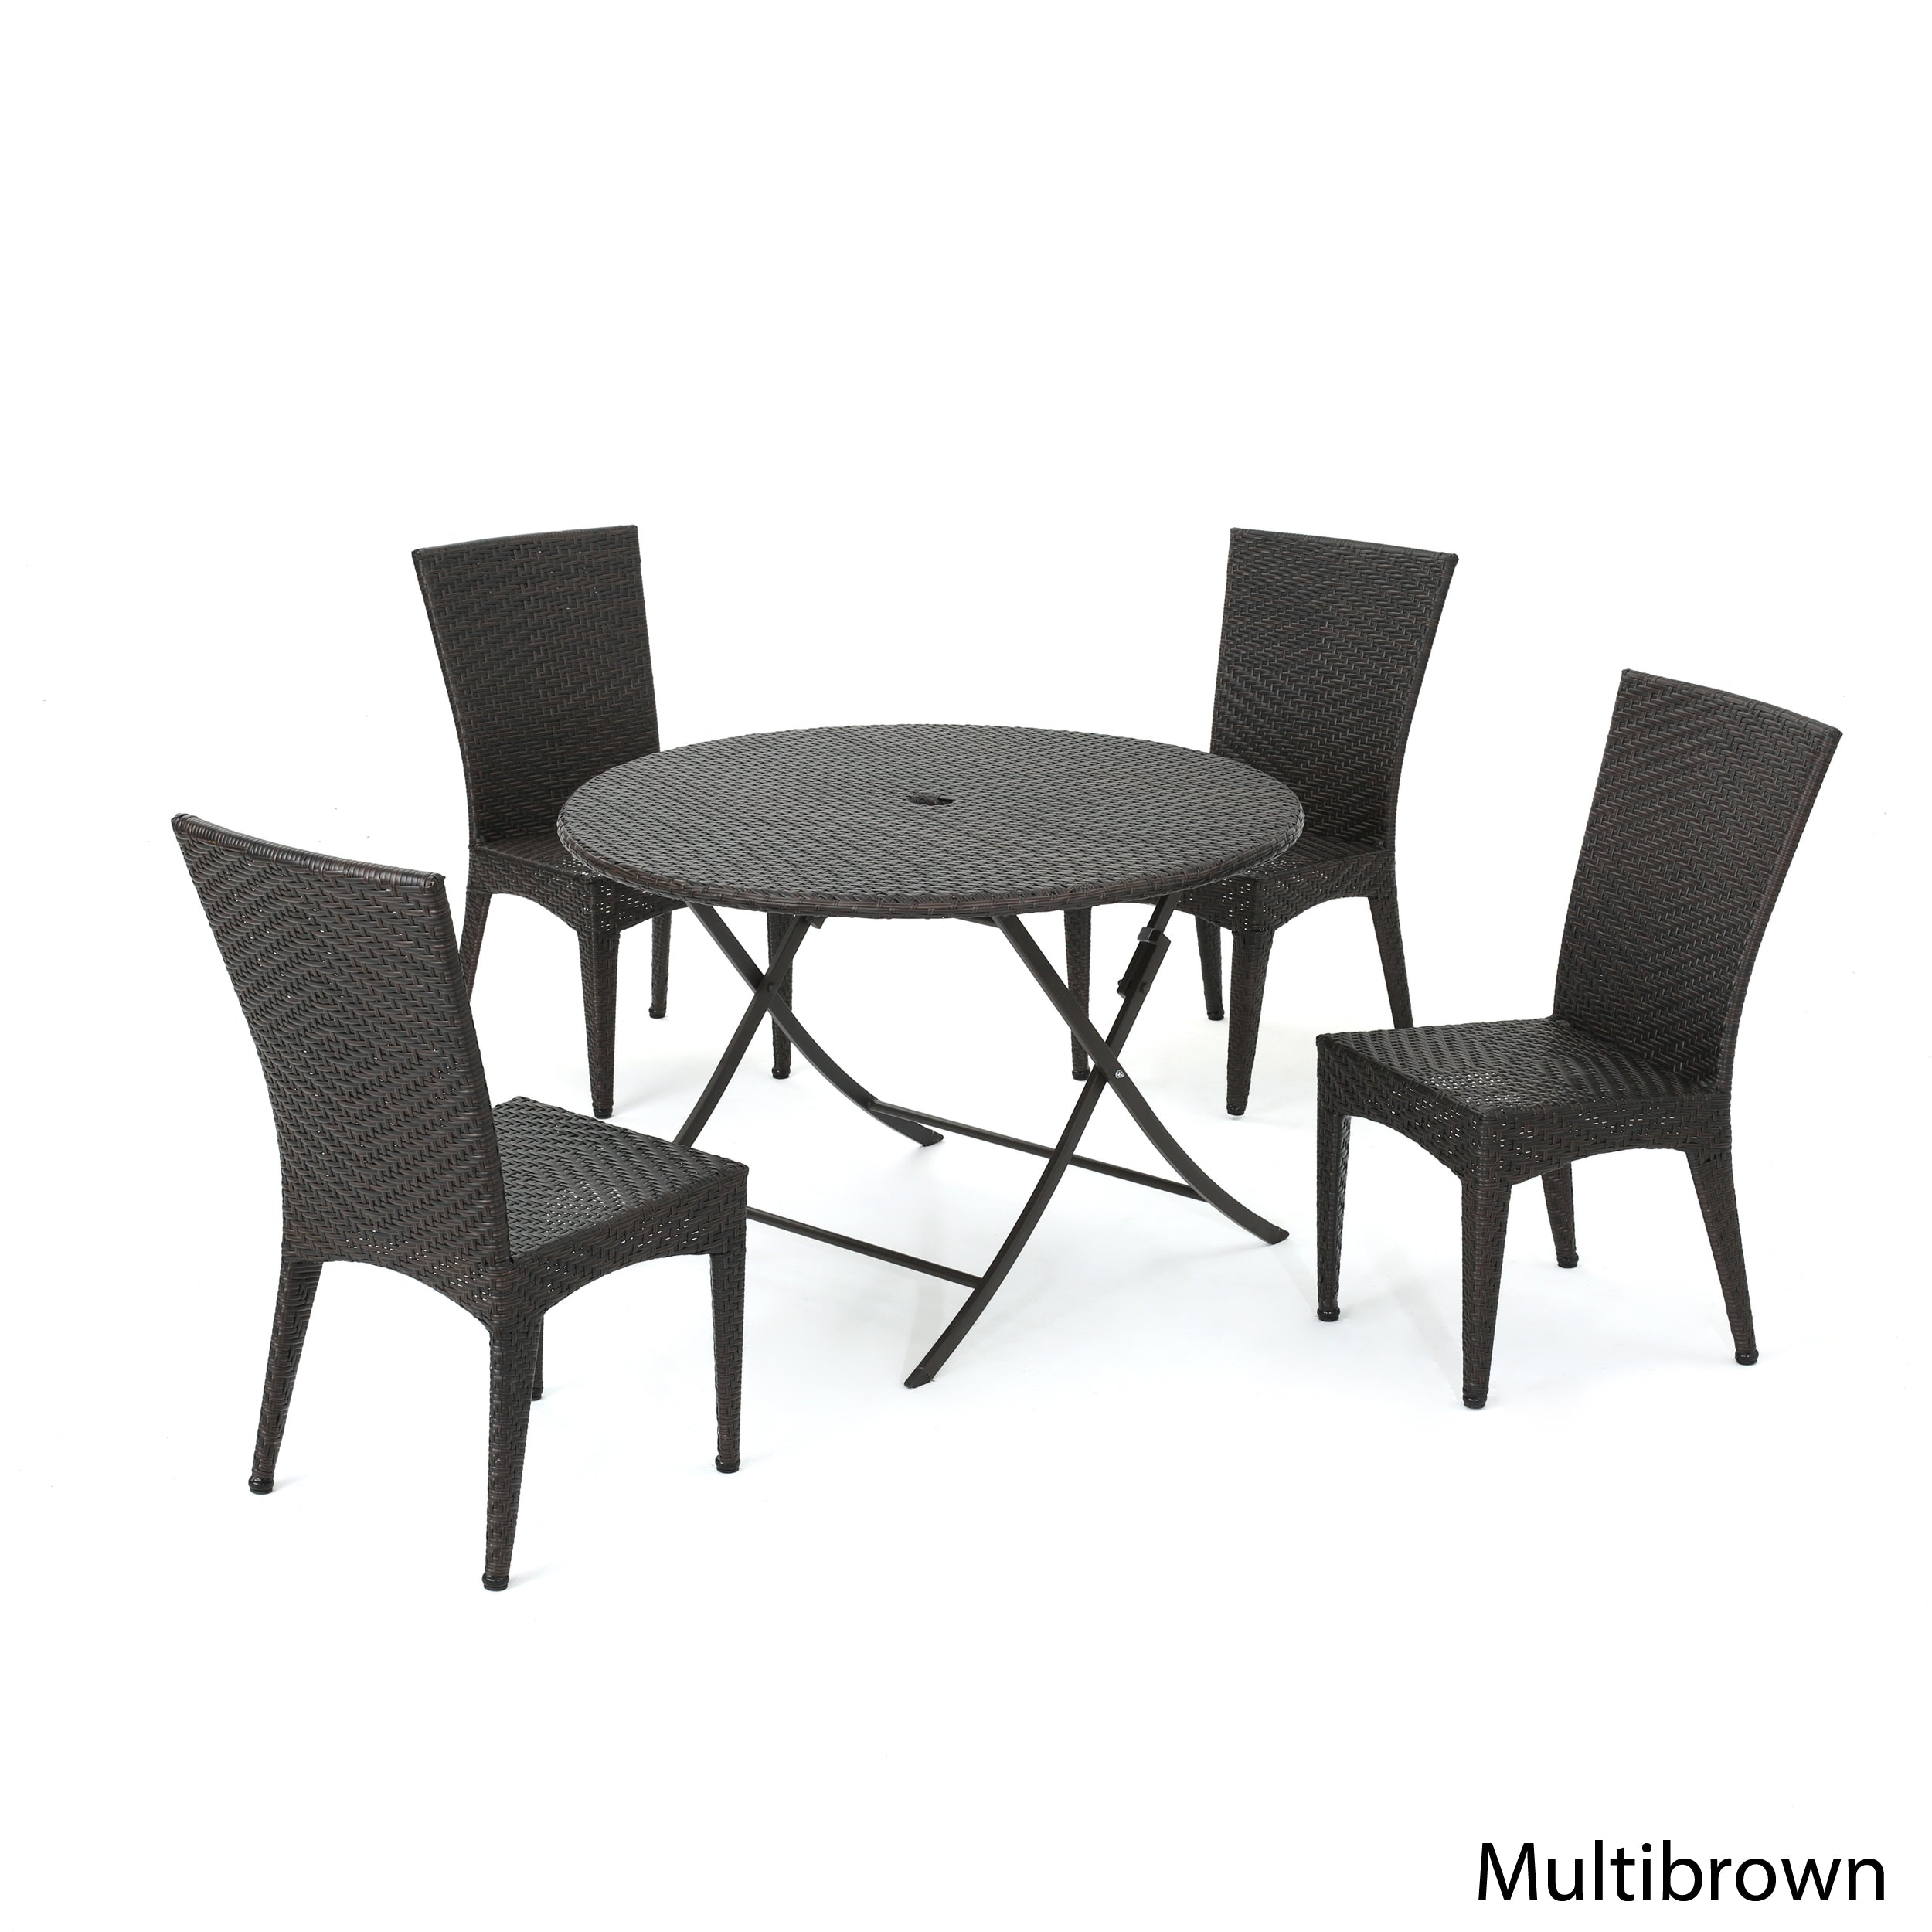 Abbey Outdoor 5 Piece Multi Brown Wicker Dining Set with Foldable Table Default Title